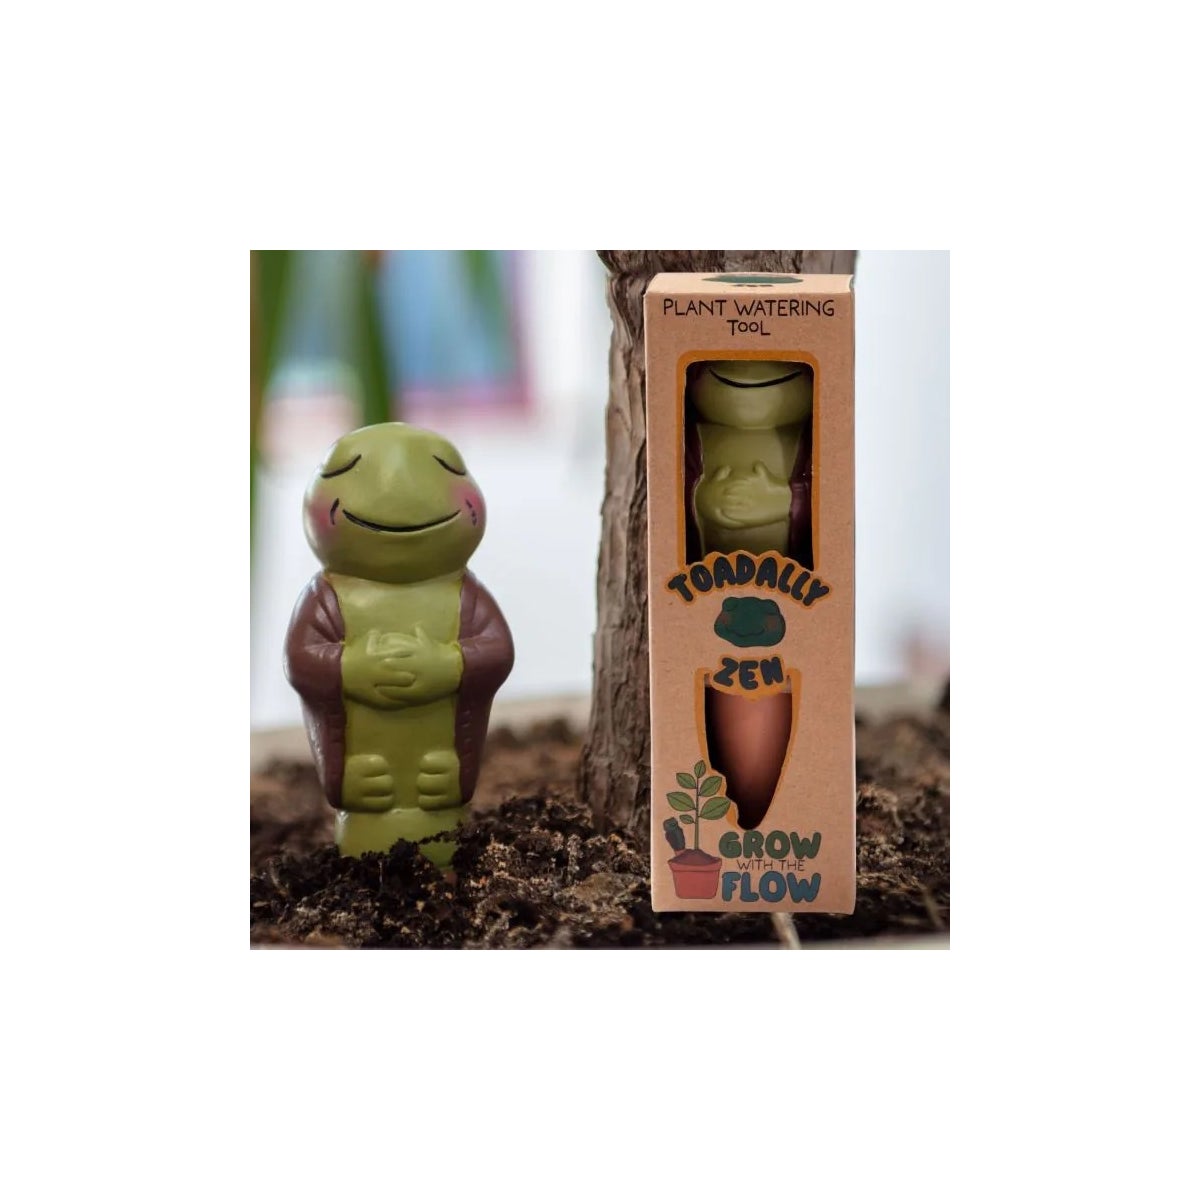 Terracotta Watering Spikes Grow with the Flow Toad